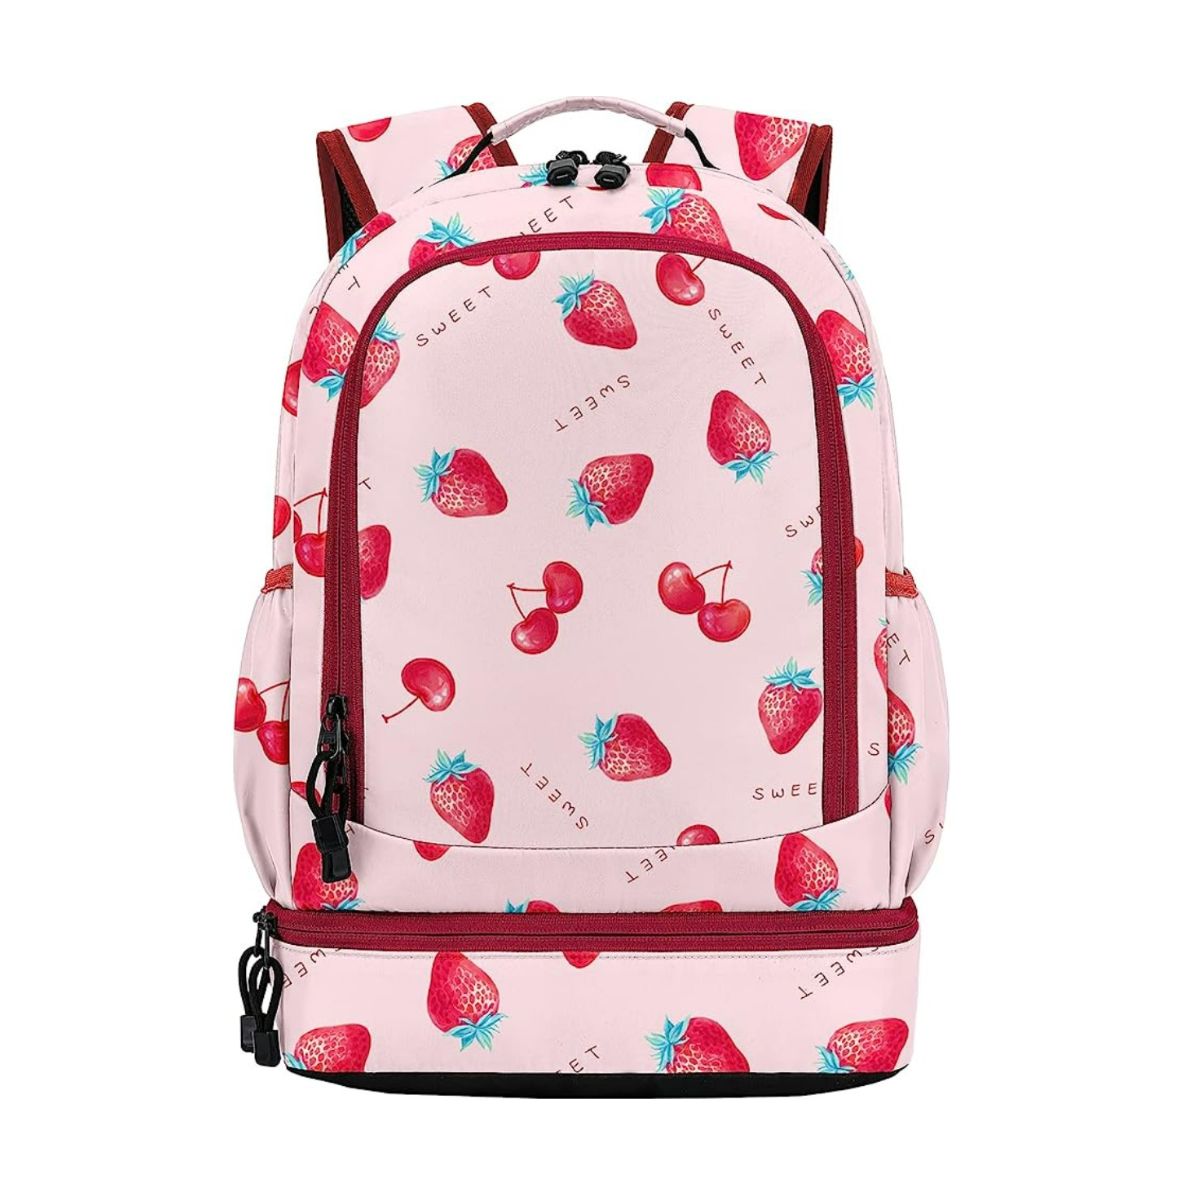 Pink backpack lunch box for kids with red zippers and red cherries and strawberries as a pattern.